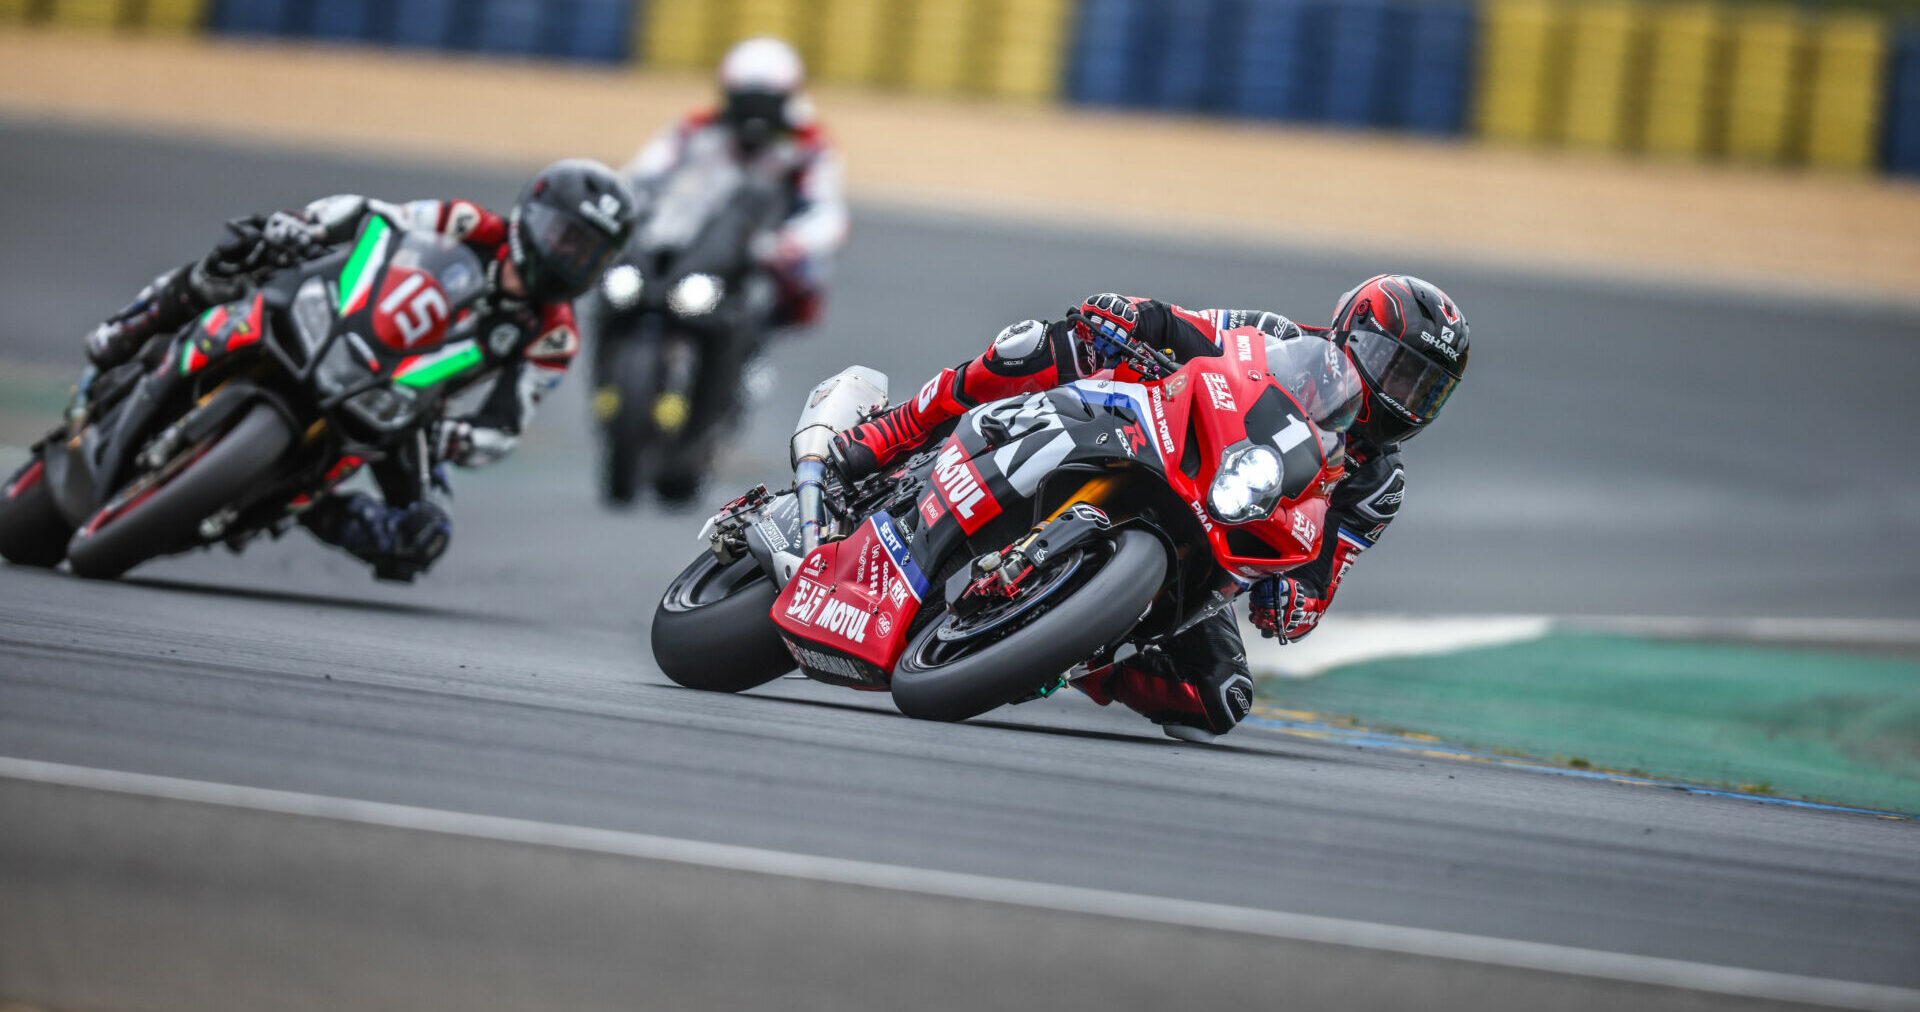 Yoshimura SERT Motul (1) leads a group of riders during testing at the Bugatti Circuit in Le Mans, France. Photo courtesy Team Suzuki Press Office.